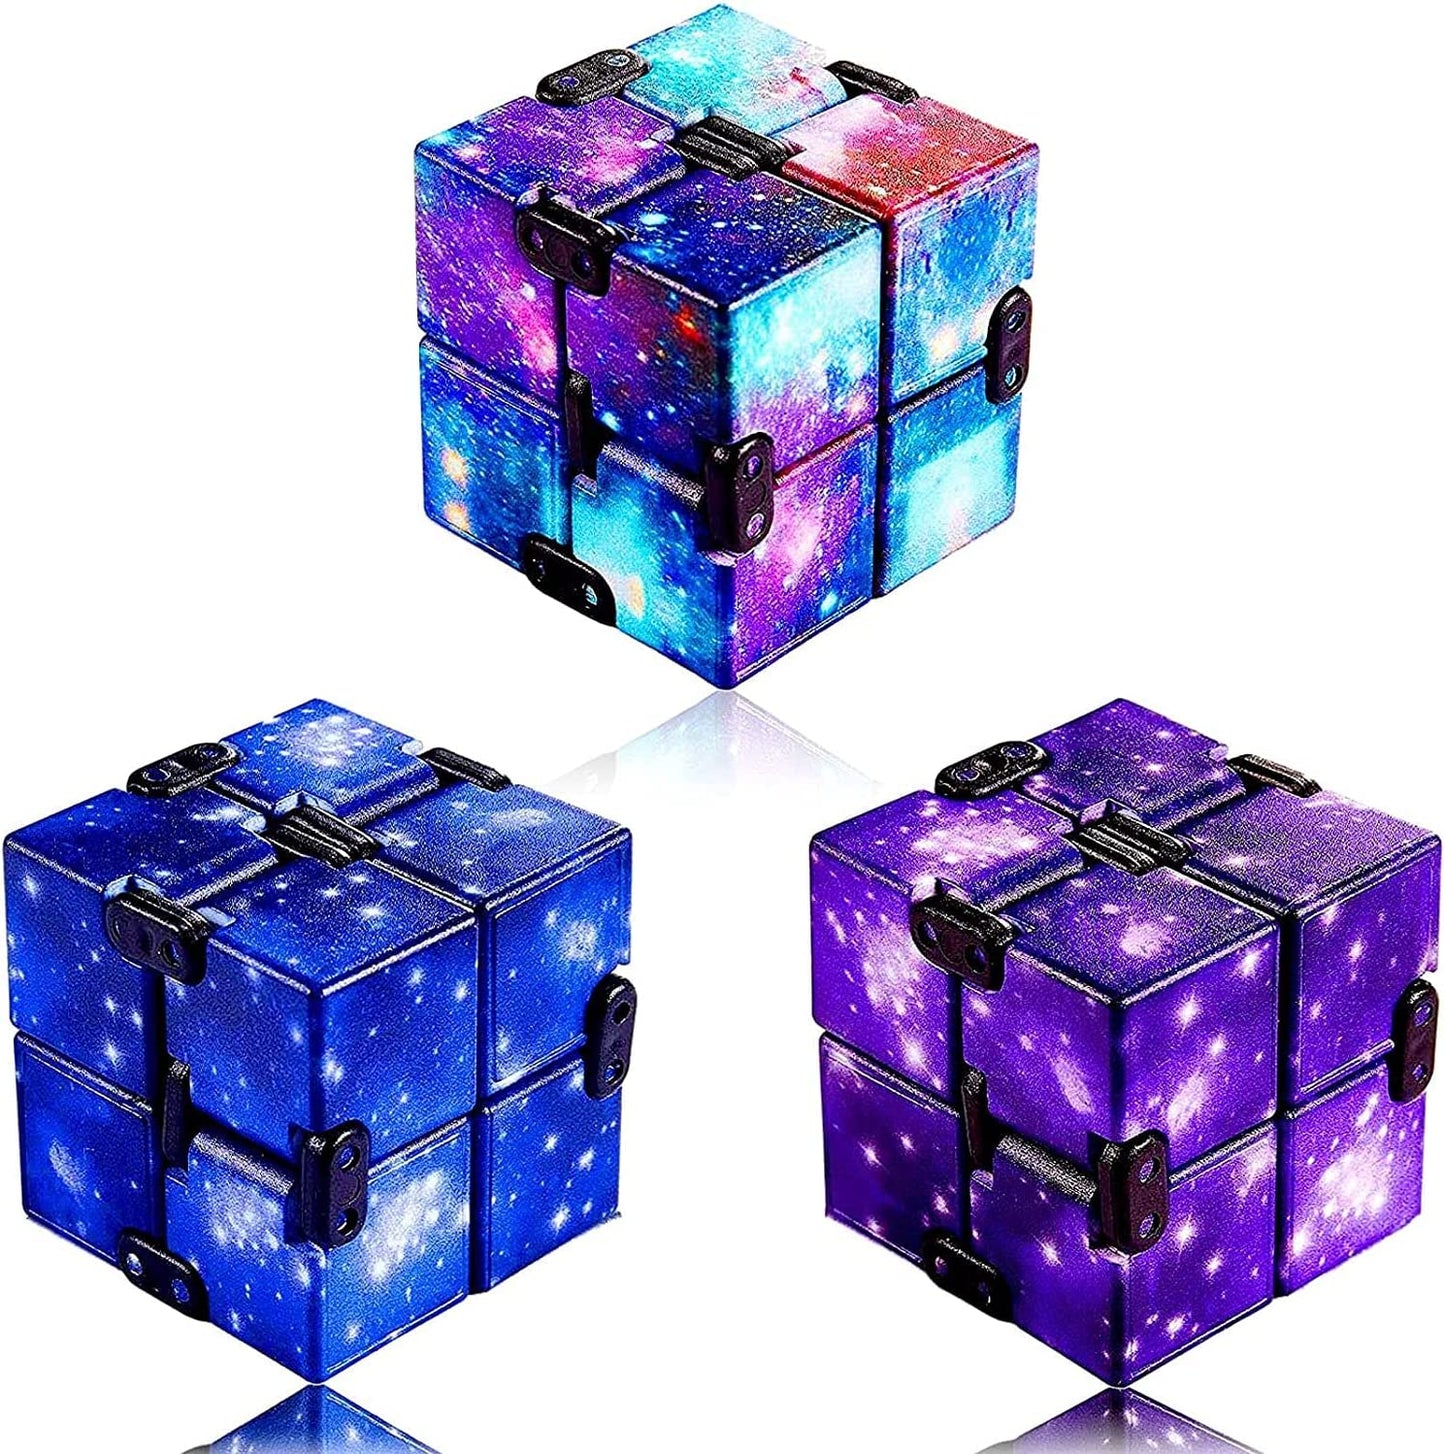 3 Pack Infinity Cube Fidget Toys, Galaxy Fidget Cube Stress and Anxiety Relief Toys, Toy Relaxing Hand-Held